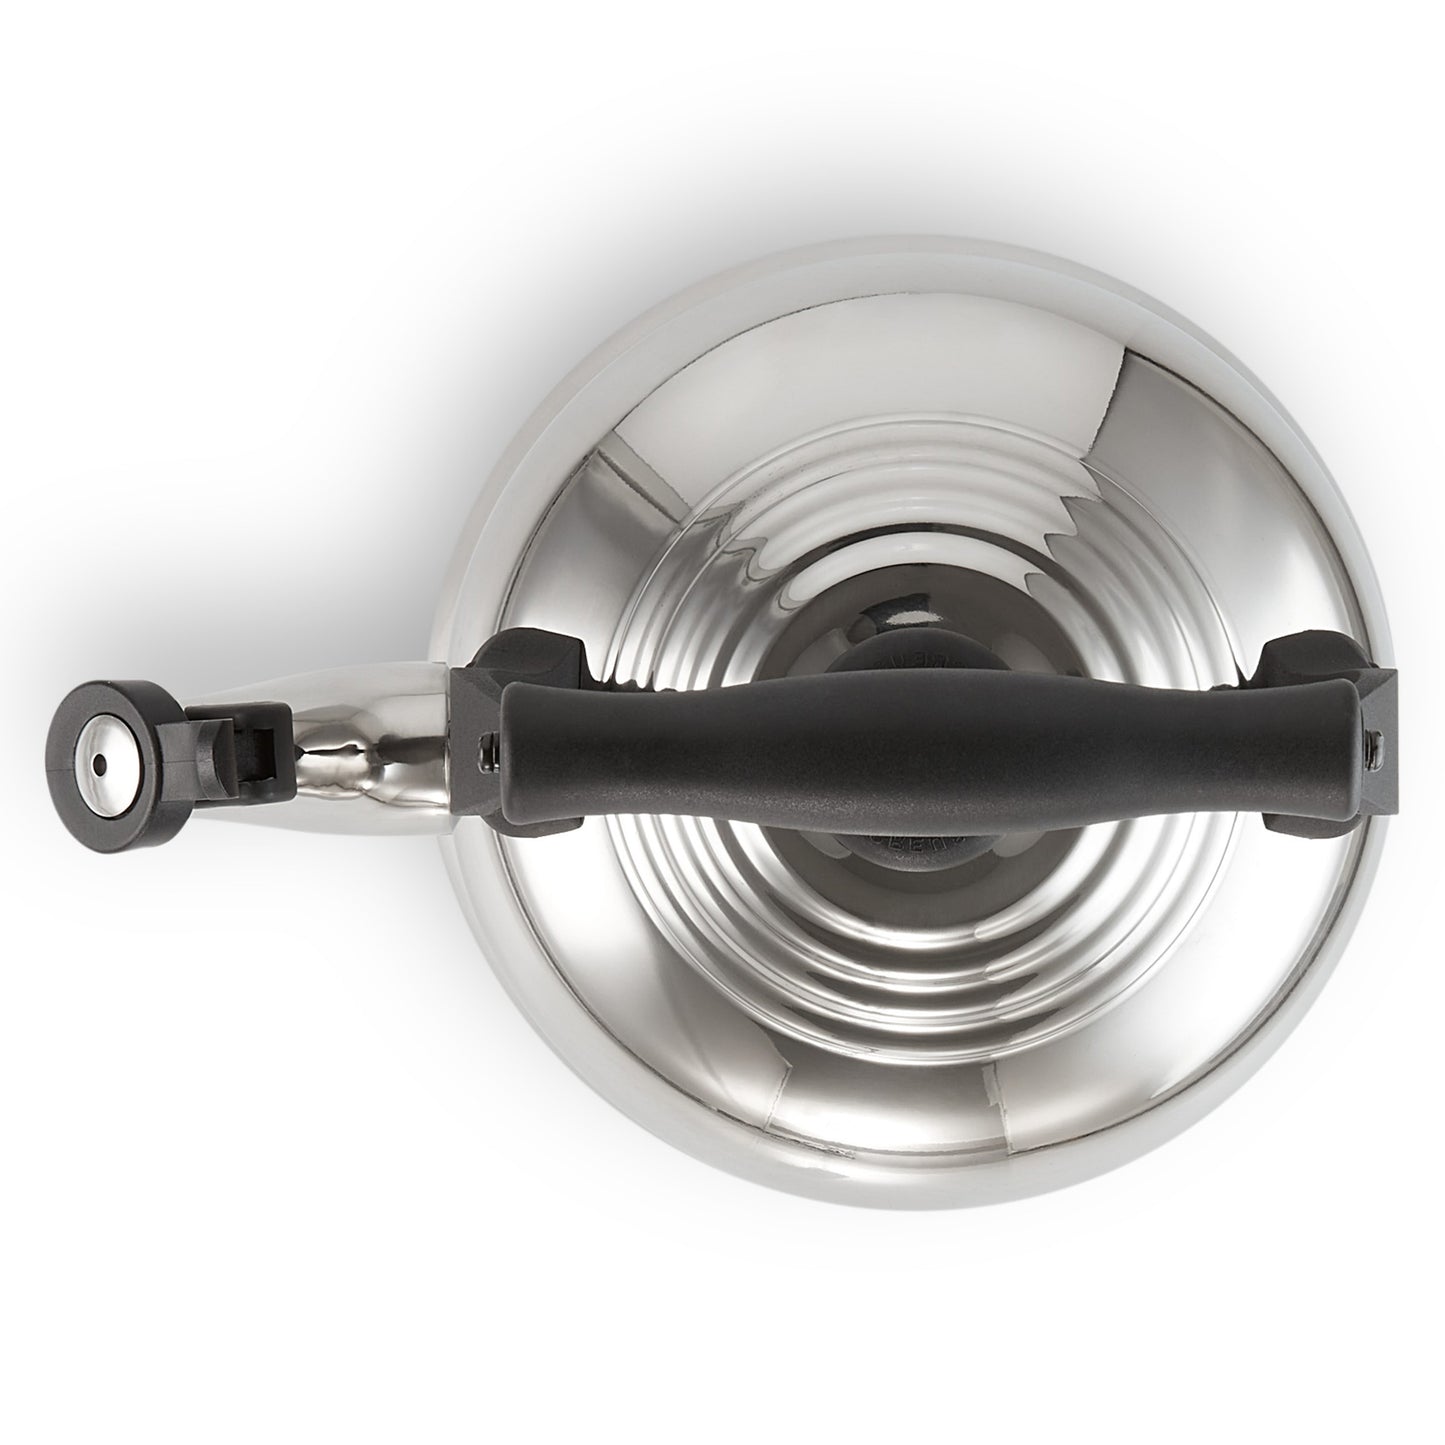 A stainless steel kettle with a black handle, birds eye view